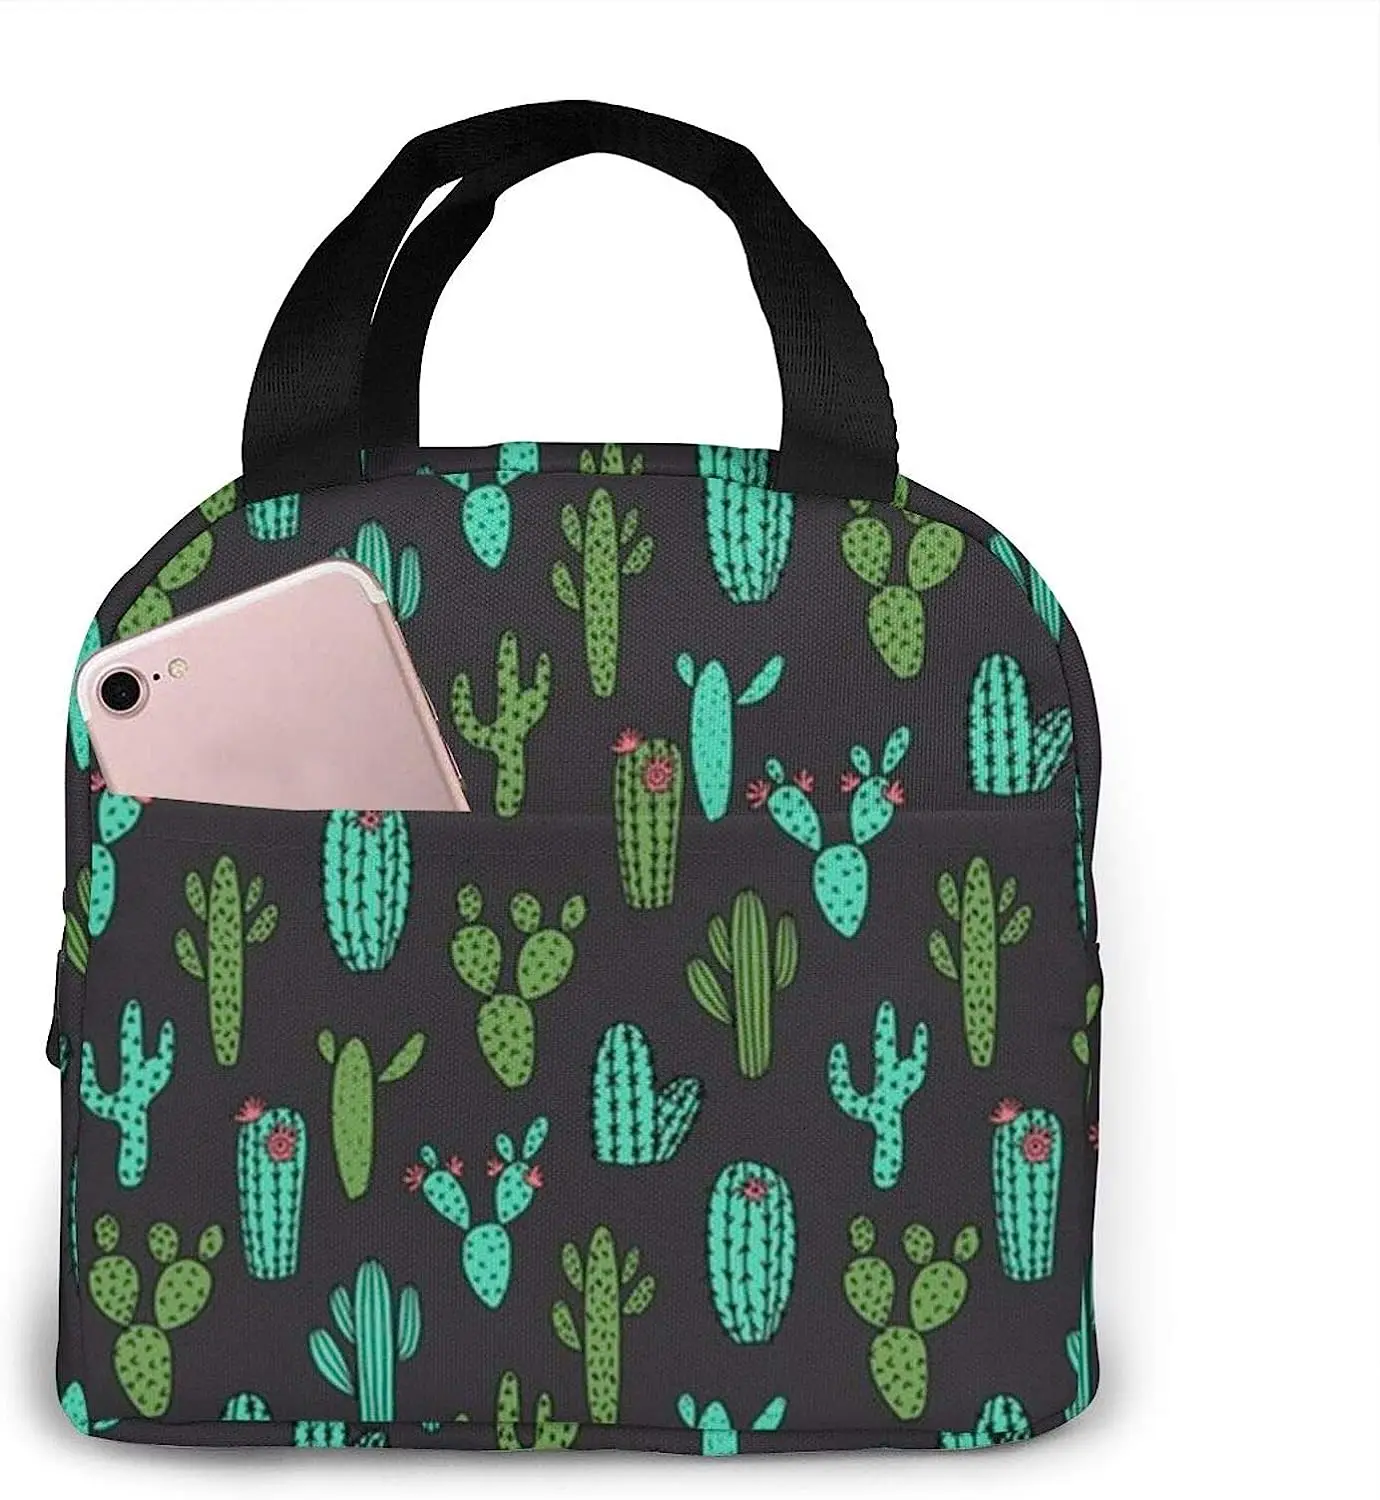 

Cactus Cacti Plants Cactus Desert Cactus Lunch Bag Portable Thermal Tote Bag for Women Insulated Lunch Box for Work Picnic Beach